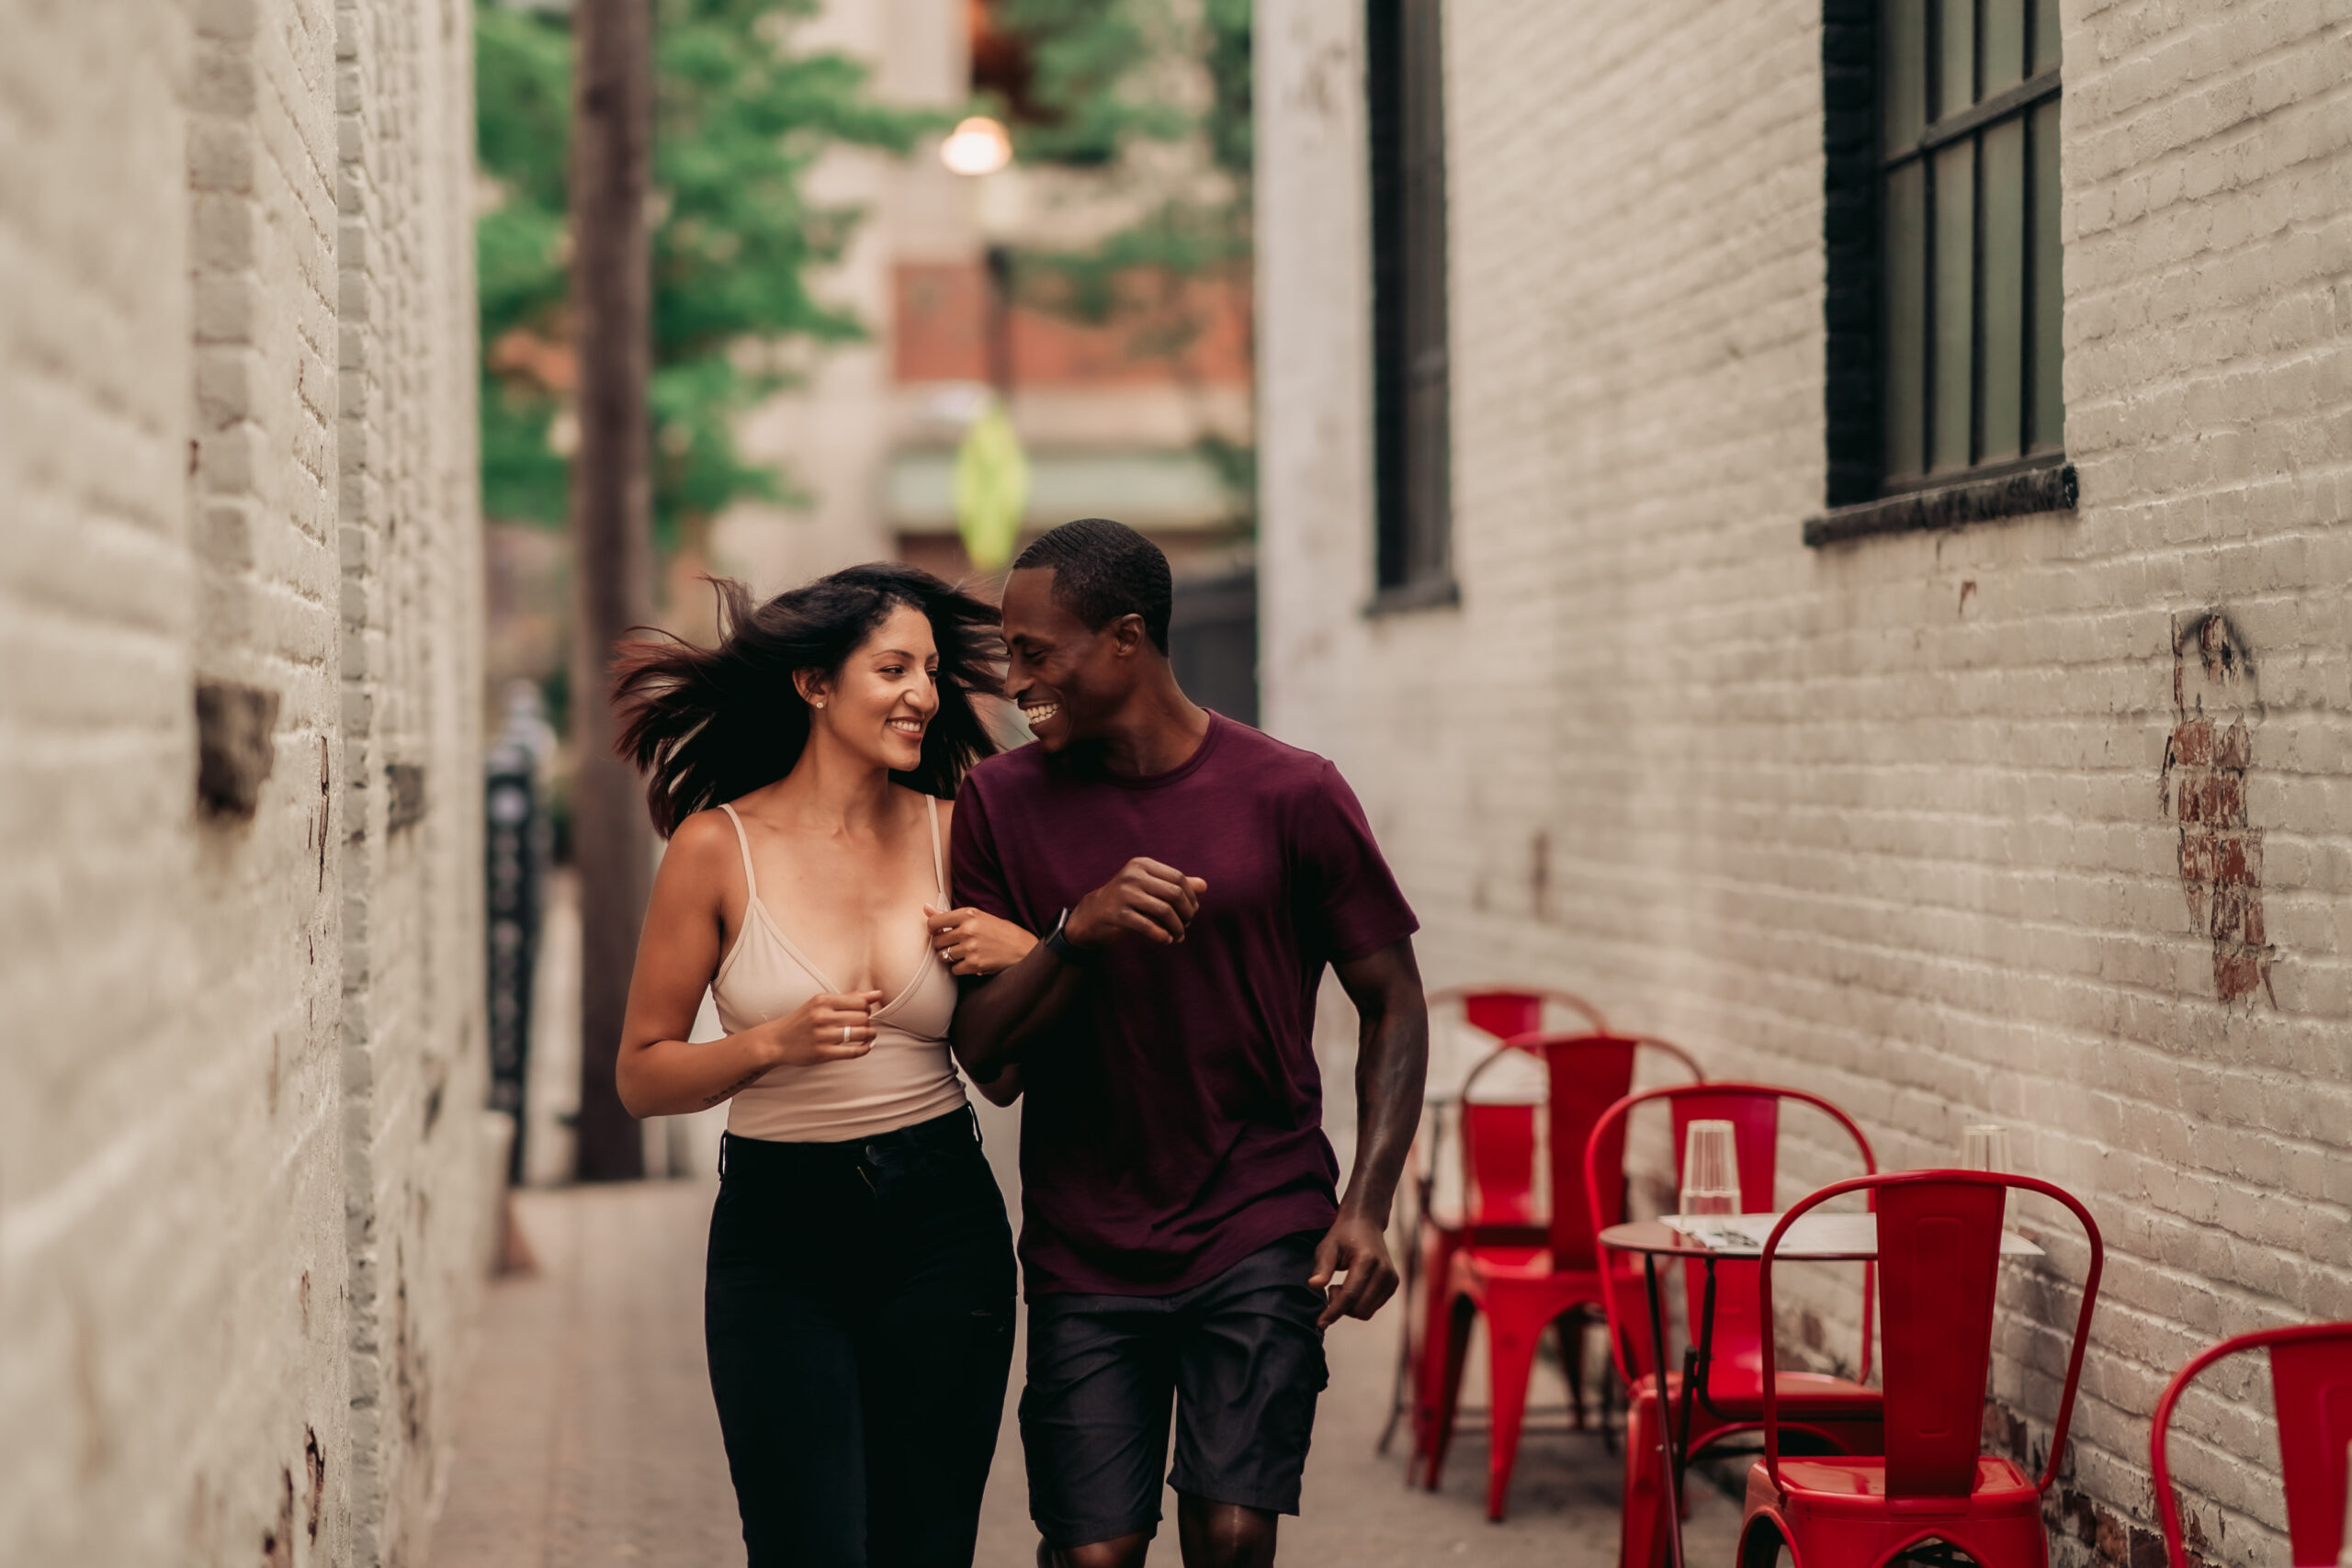 Montclair Engagement, Montclair NJ Engagement Photographer, Montclair Photographer, NJ Engagement Photographer, POC couple running through an alley in Montclair while holding each others arms and smiling and looking at each other